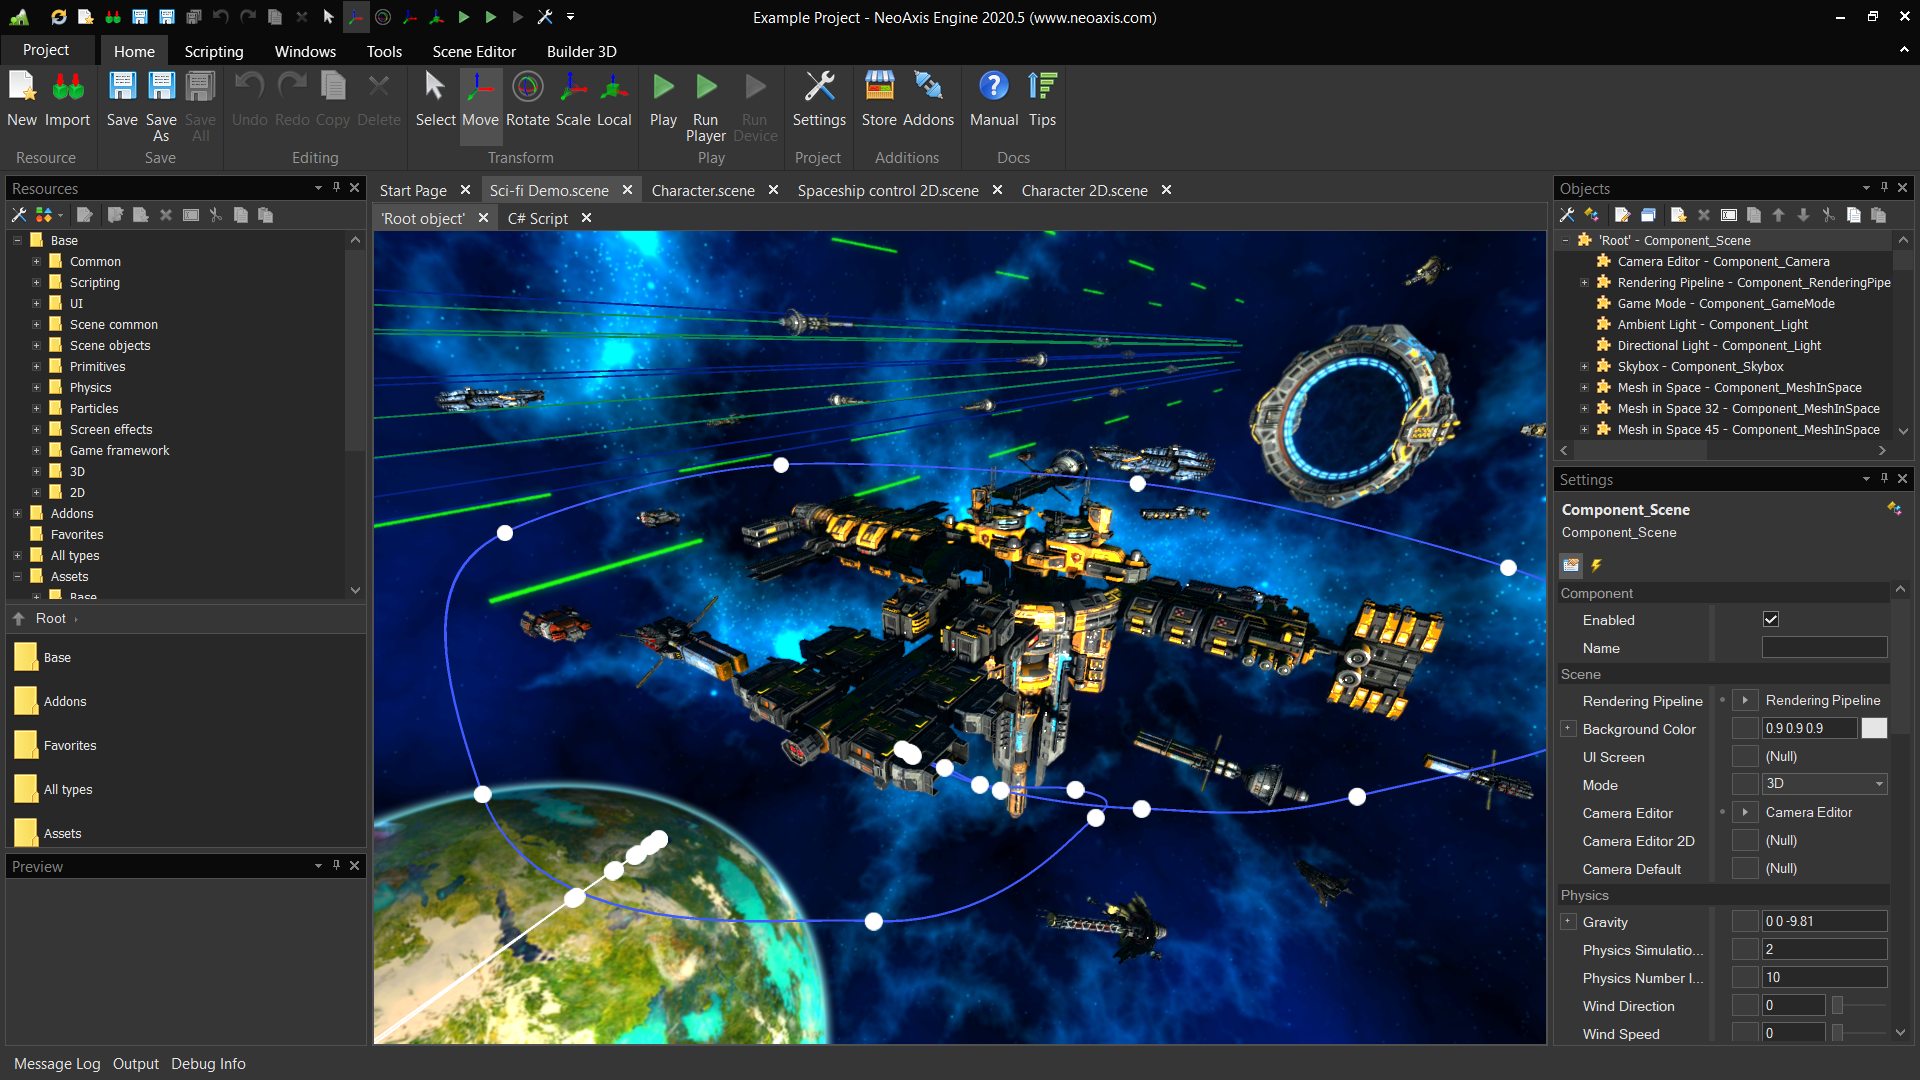 NeoAxis Engine 2020.5 Released - .NET Core, Visual Studio Code, Rider support, improved built-in GUI